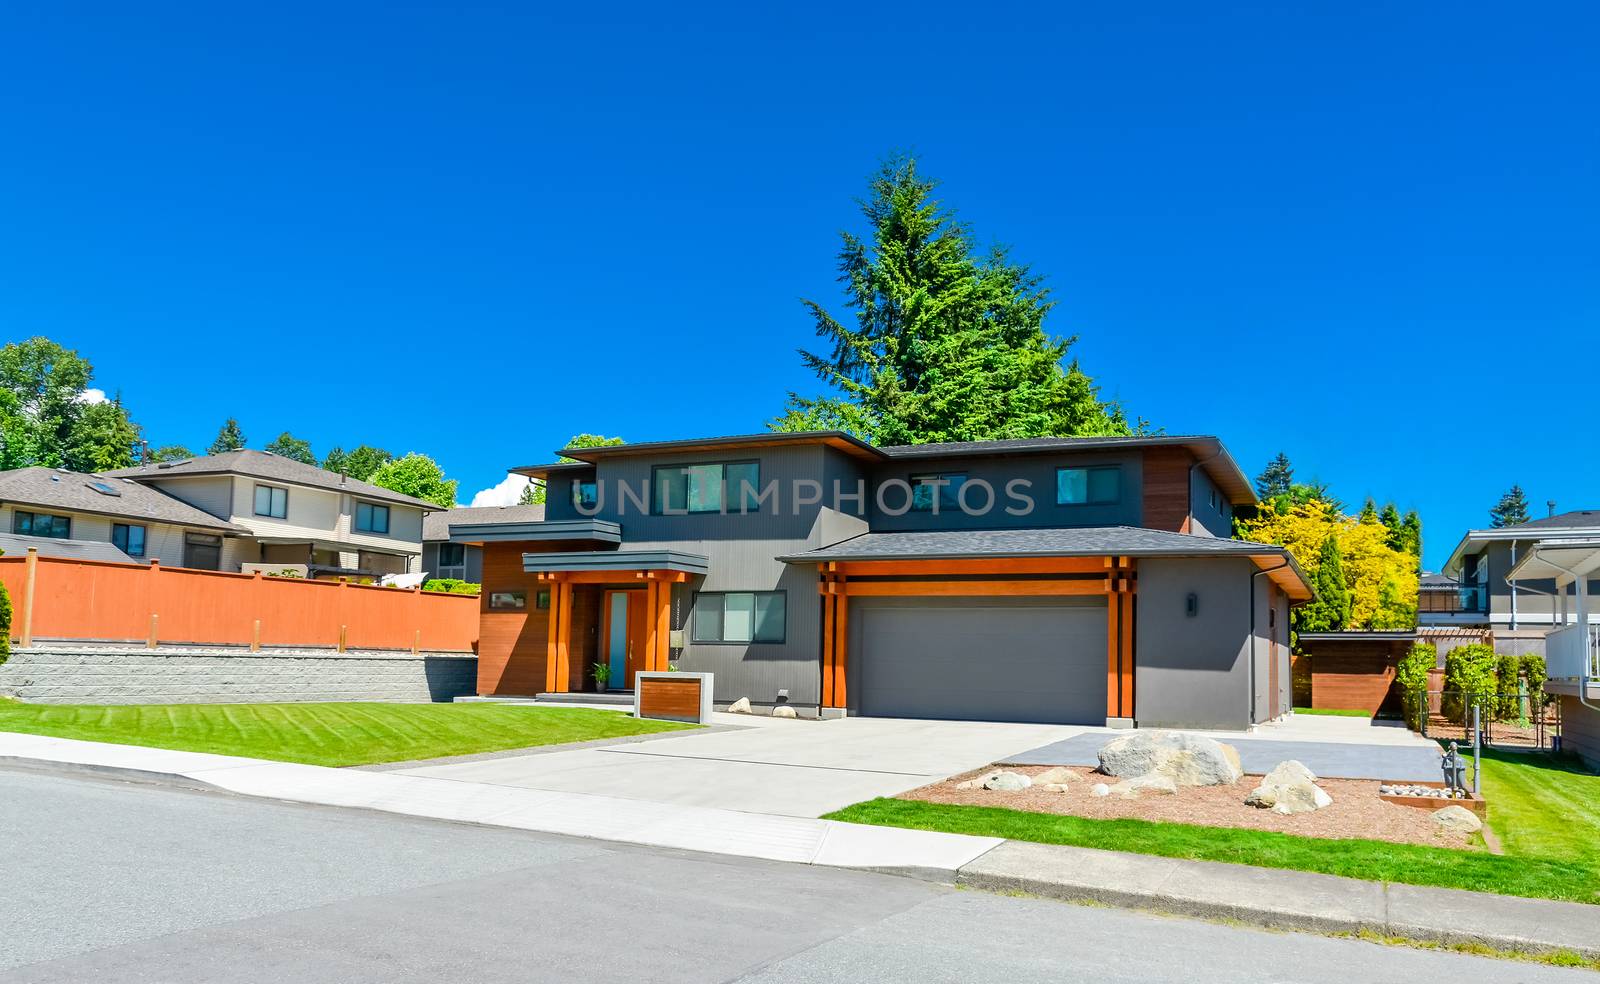 Newly renovated family house in Vancouver, British Columbia. Residential house with wide garage door and concrete driveway